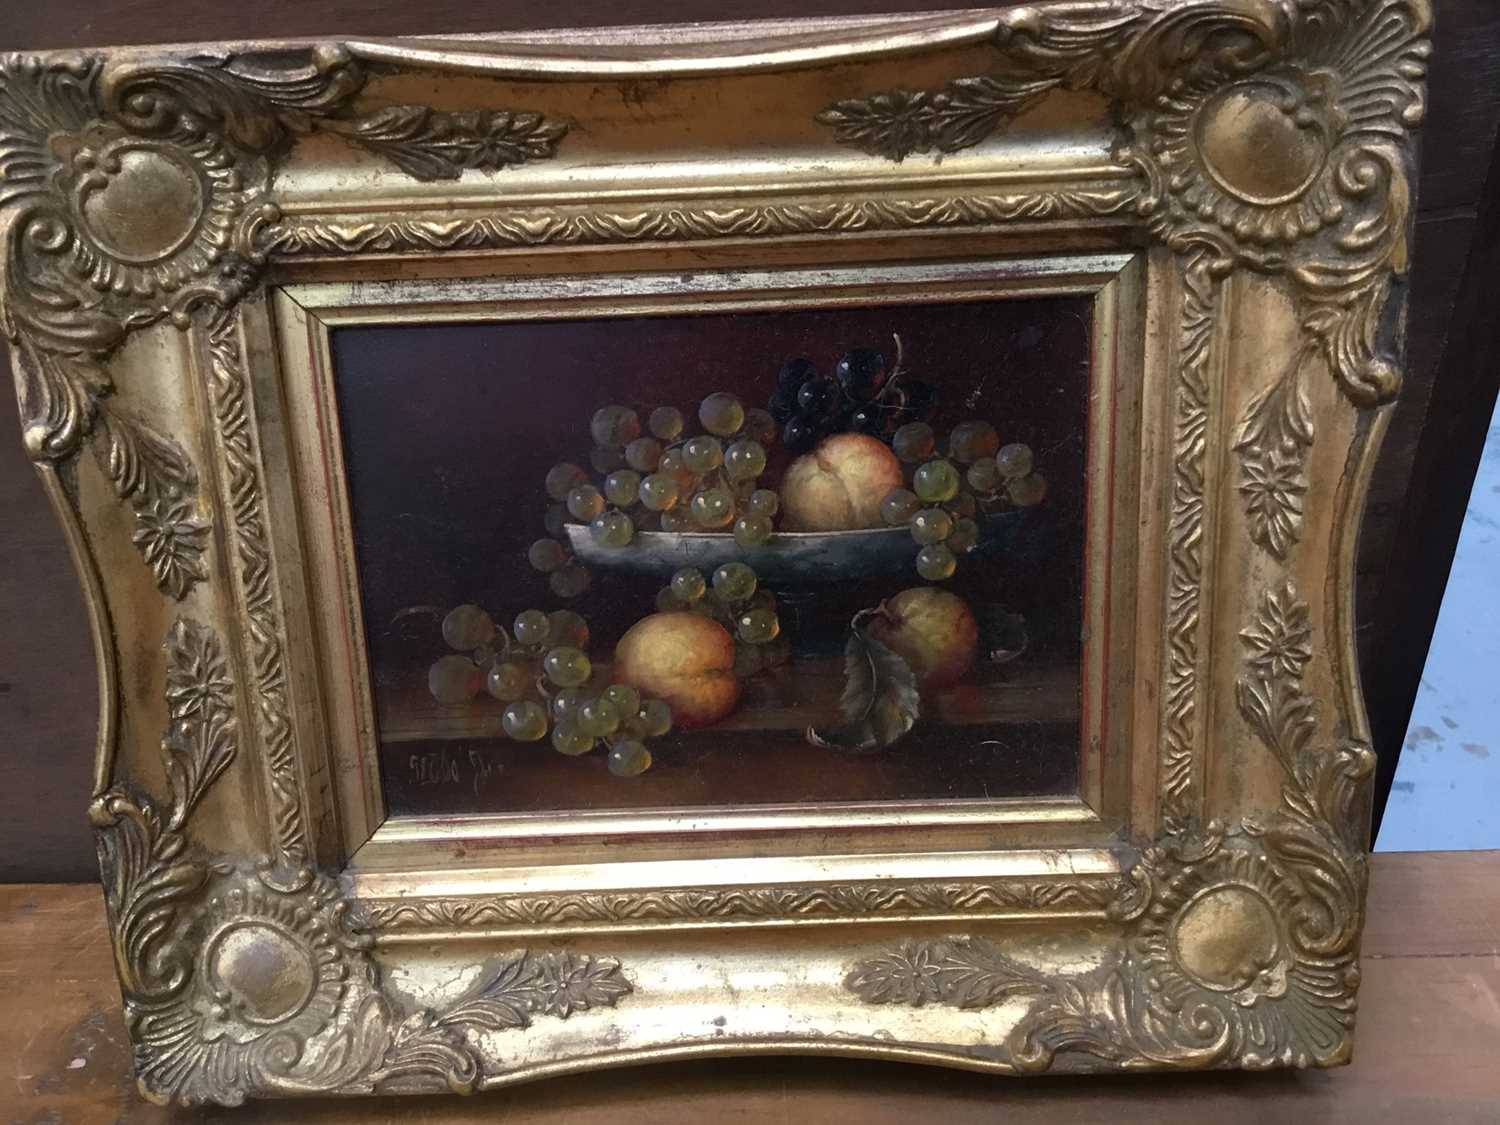 Lot 33 - Pair of Continental school oils on panel - still life of fruit, indistinctly signed, in gilt frames